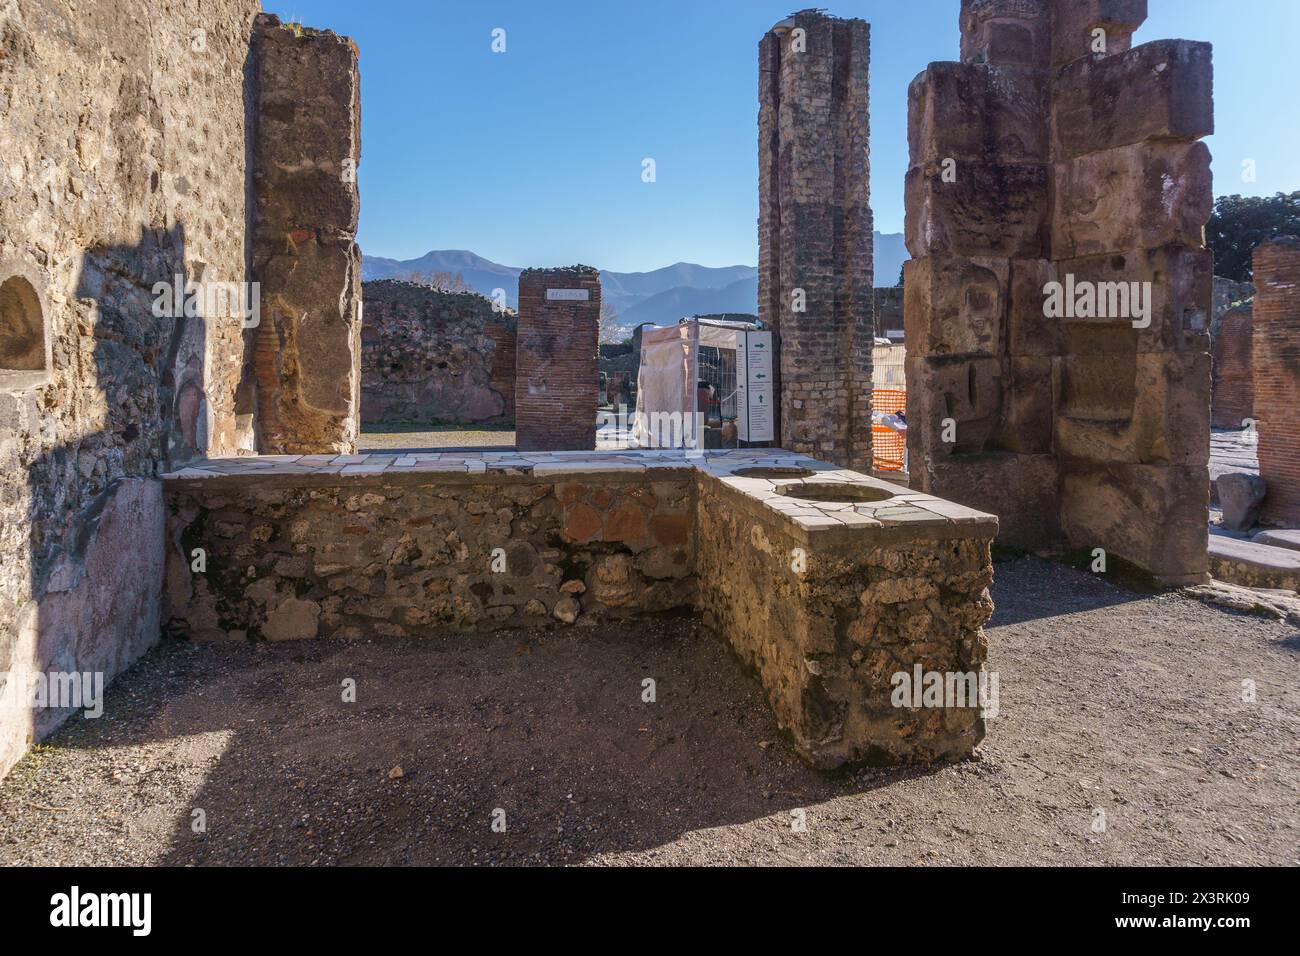 Ancient food counter with ceramic pots at the ancient roman city of Pompeii, Campania, Italy Stock Photo